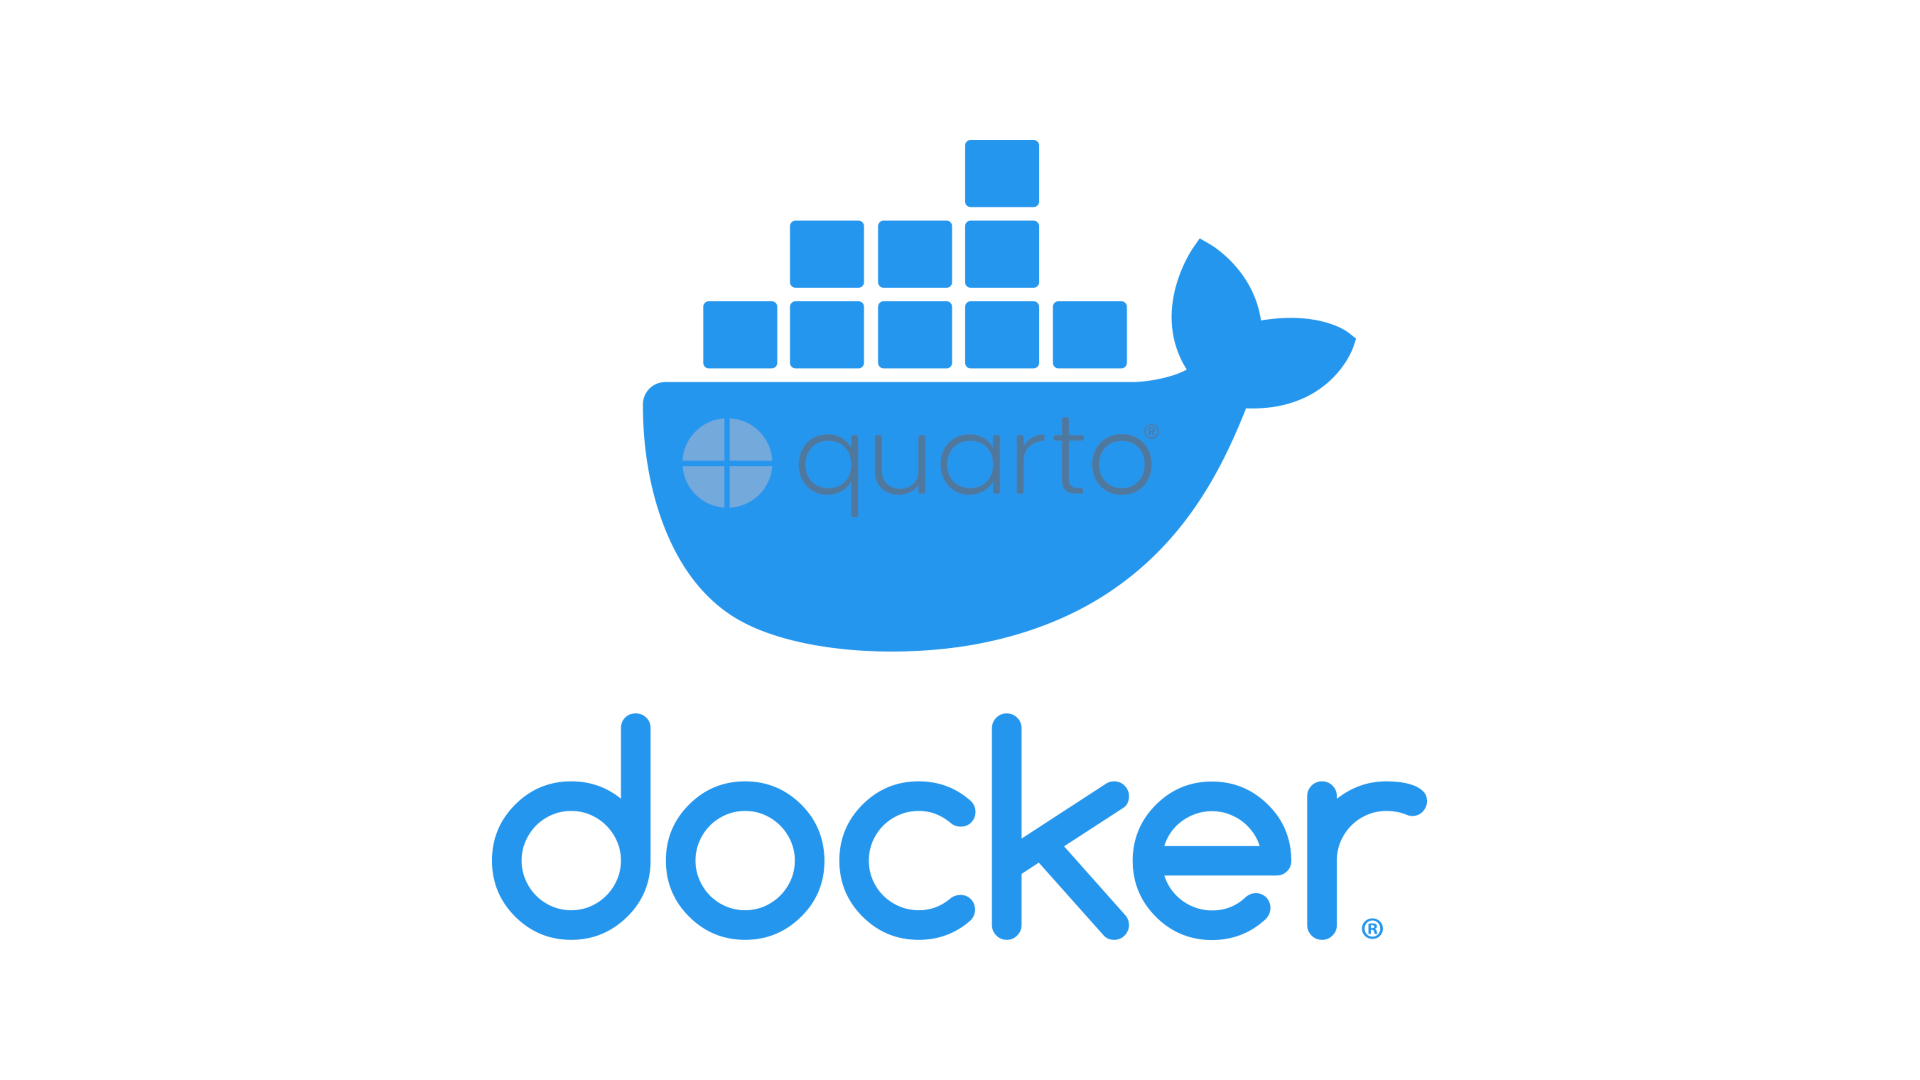 Docker logo with a whale and containers on top of it, and Quarto logo with text inside the whale.
